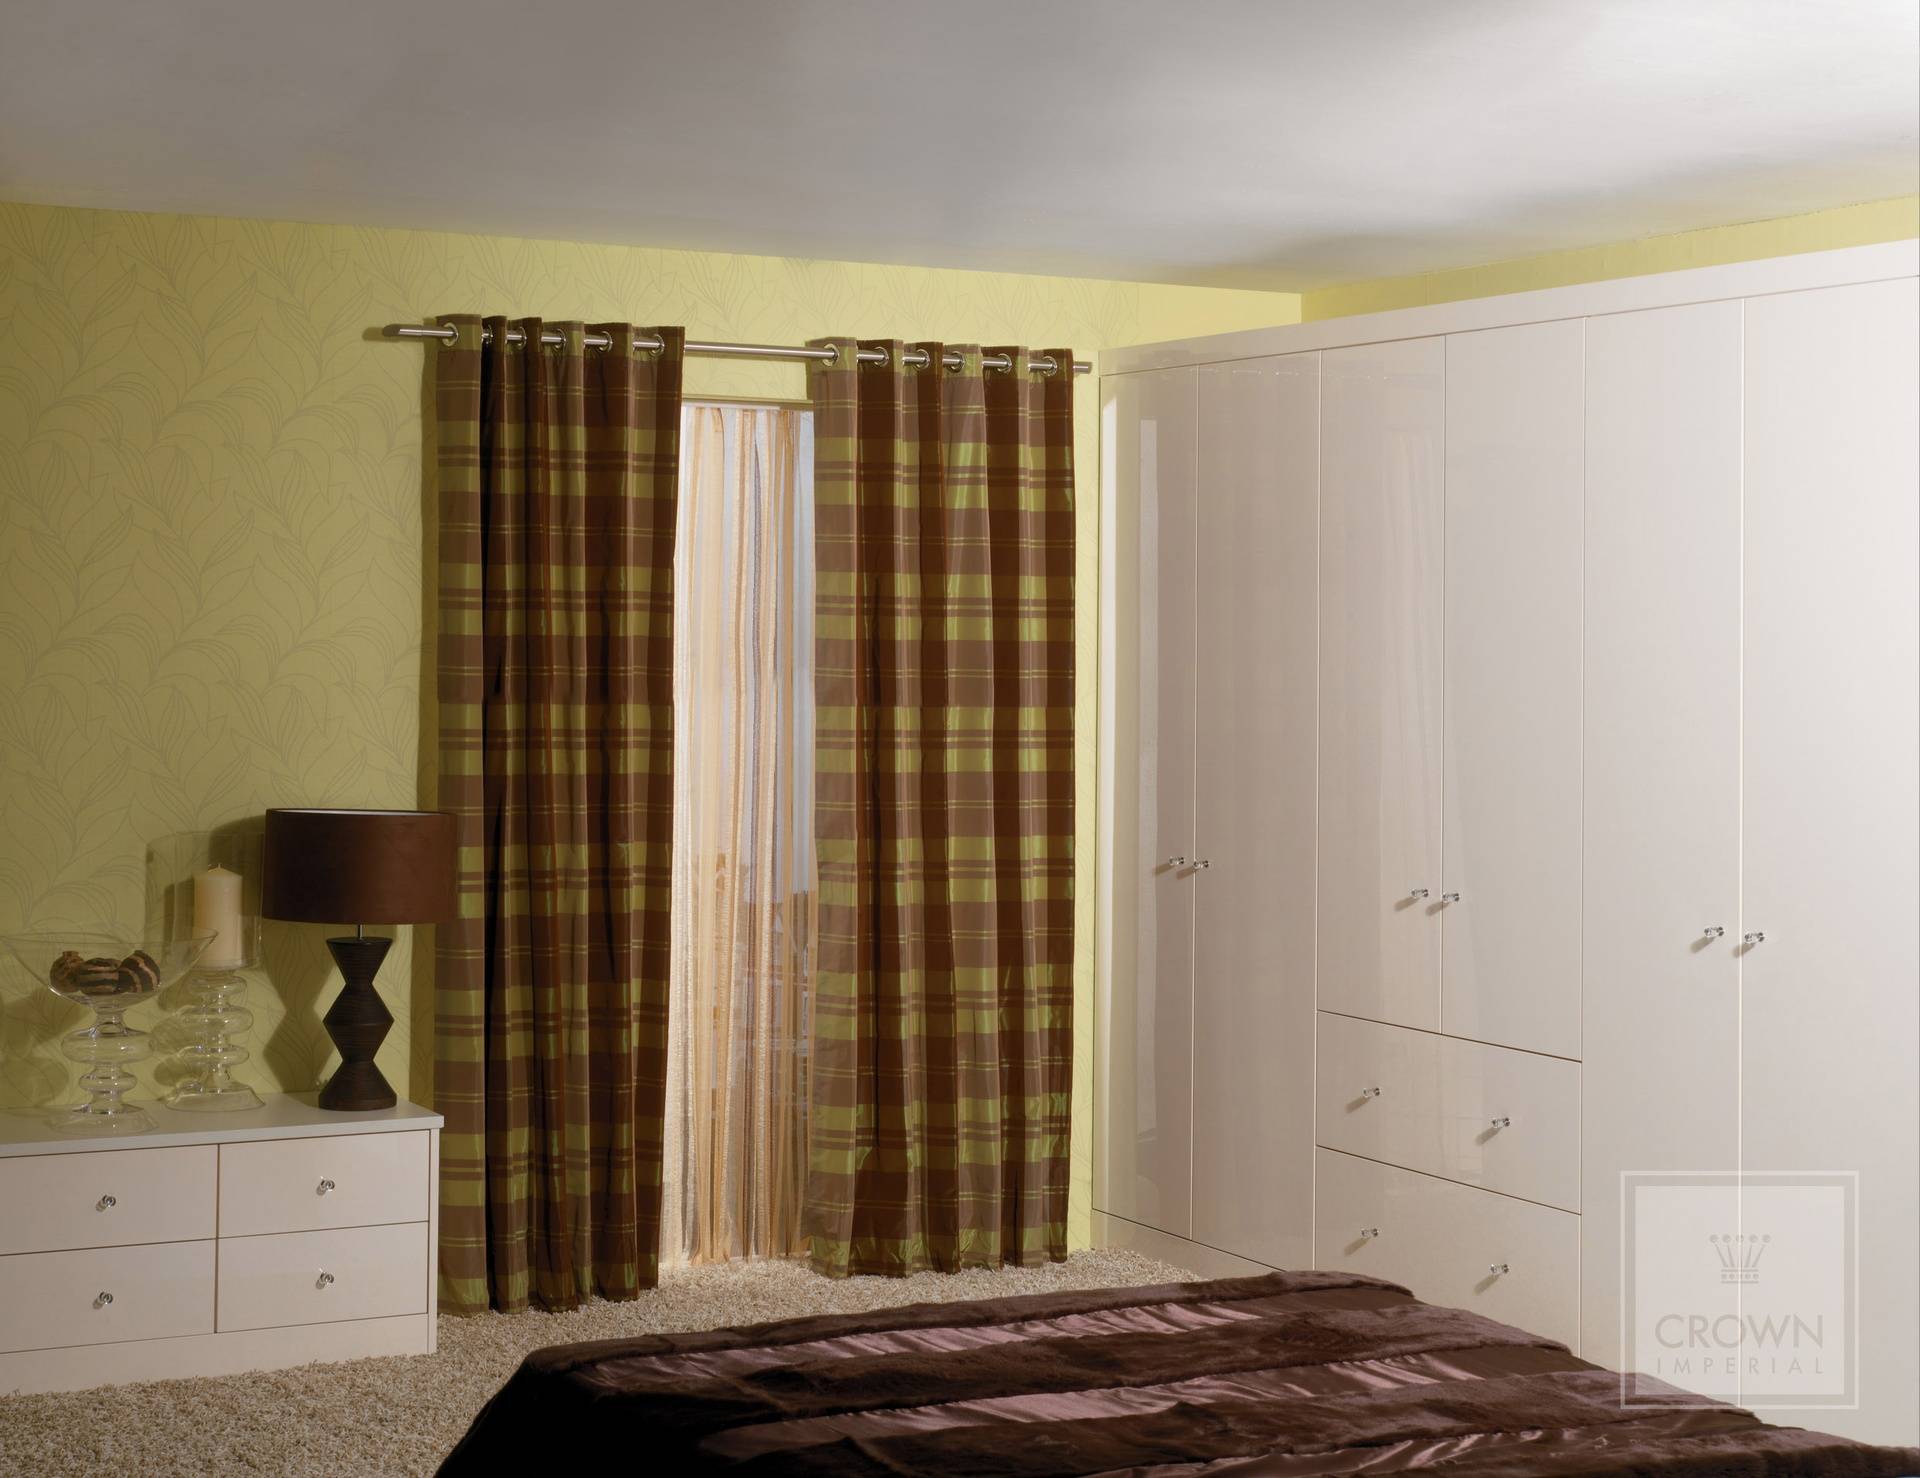 CROWN RIALTO GLOSS OYSTER (PALE CREAM) BEDROOM